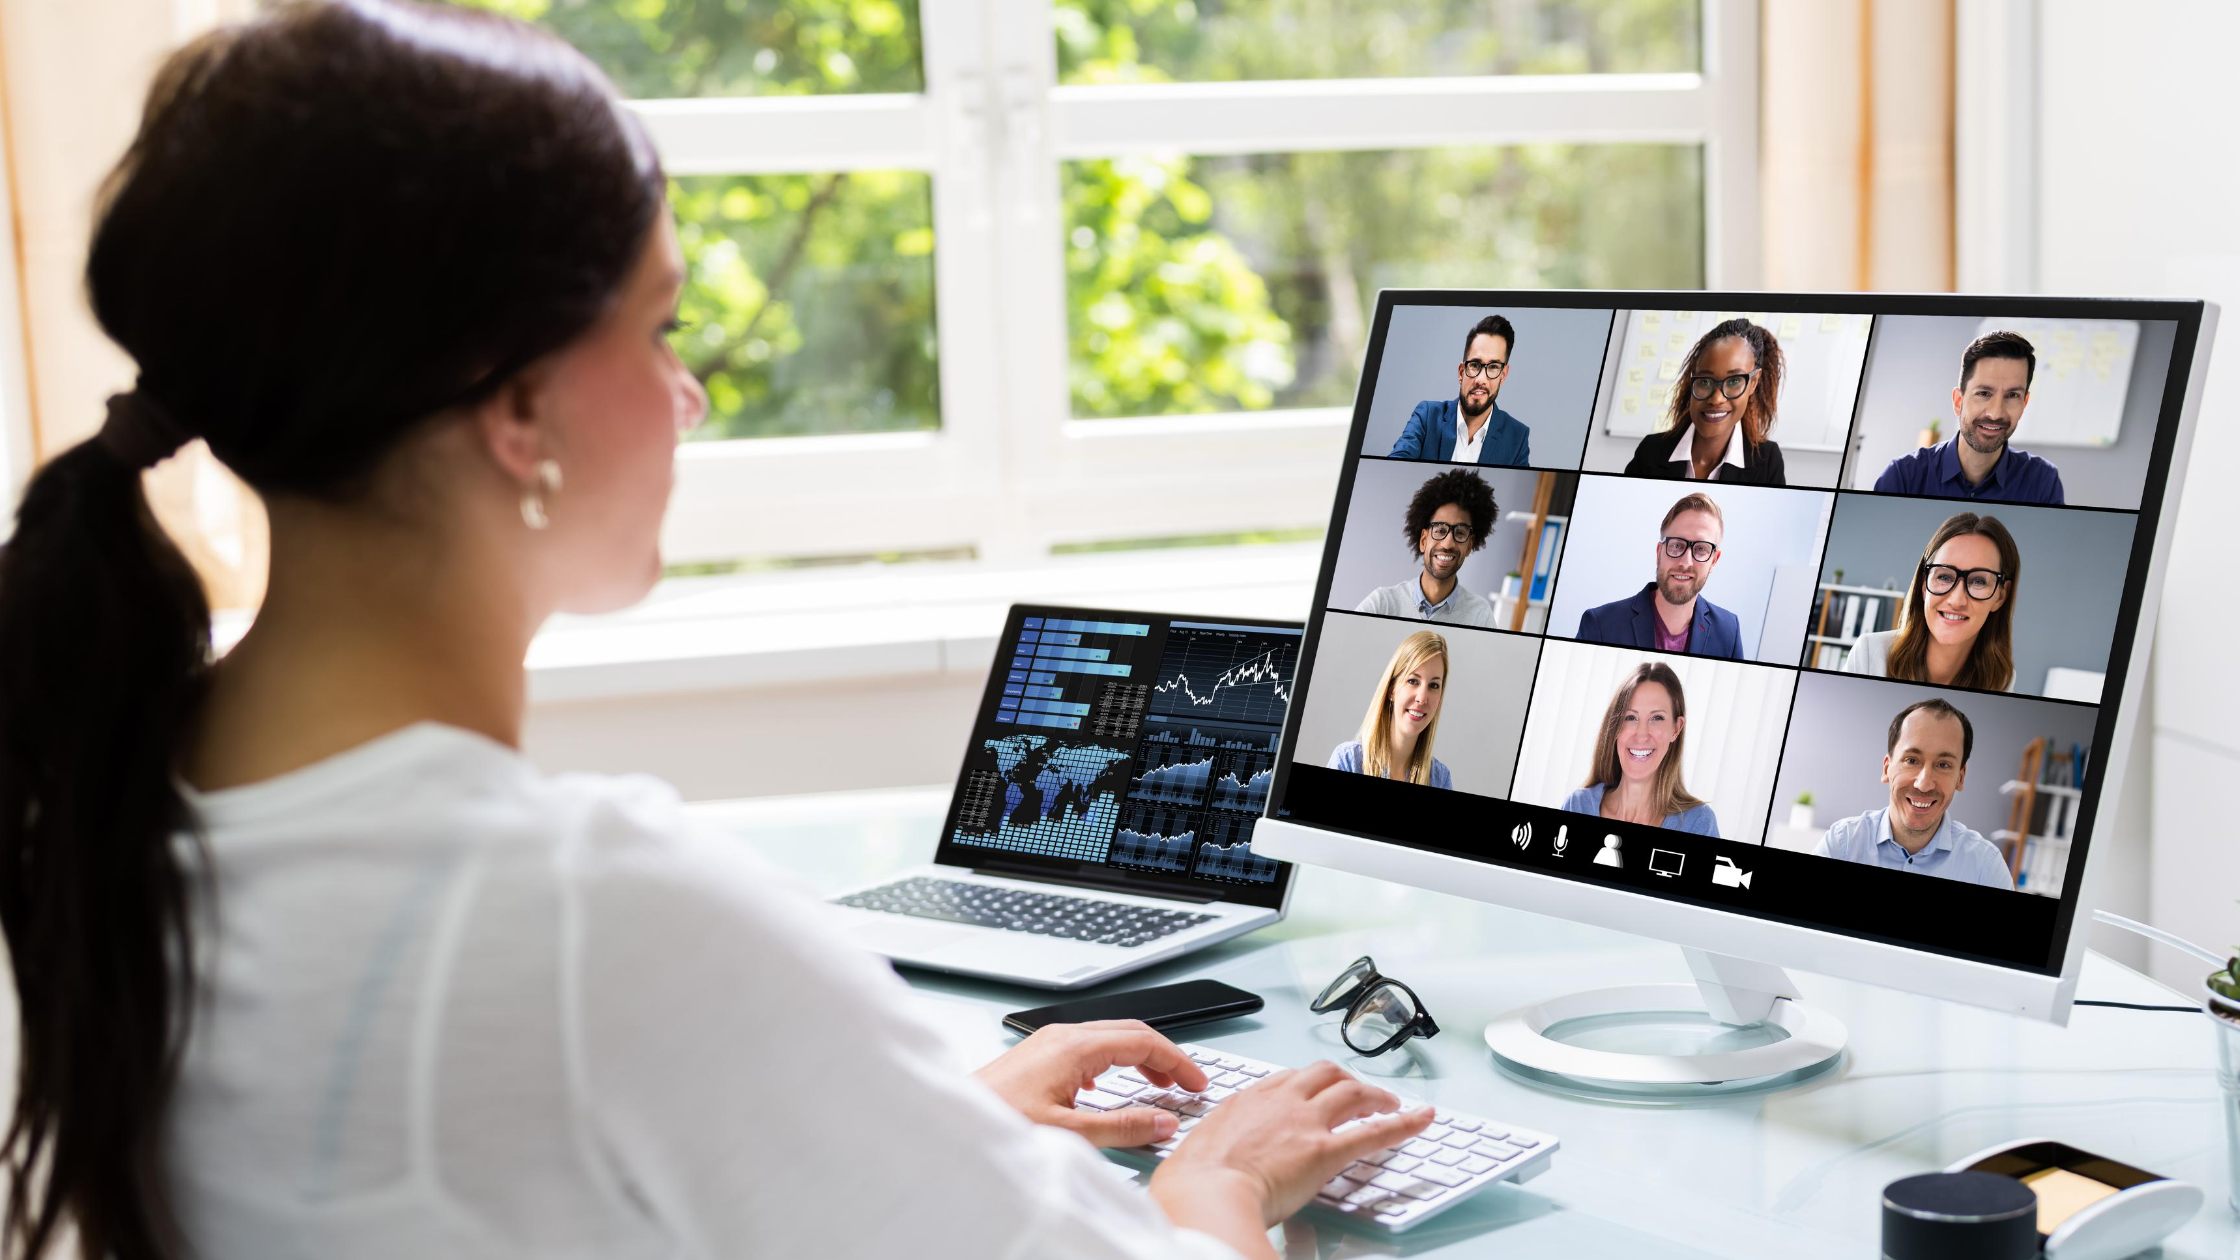 VIDEO CONFERENCING TIPS: Making It Look Professional - Kerr Tax CPA